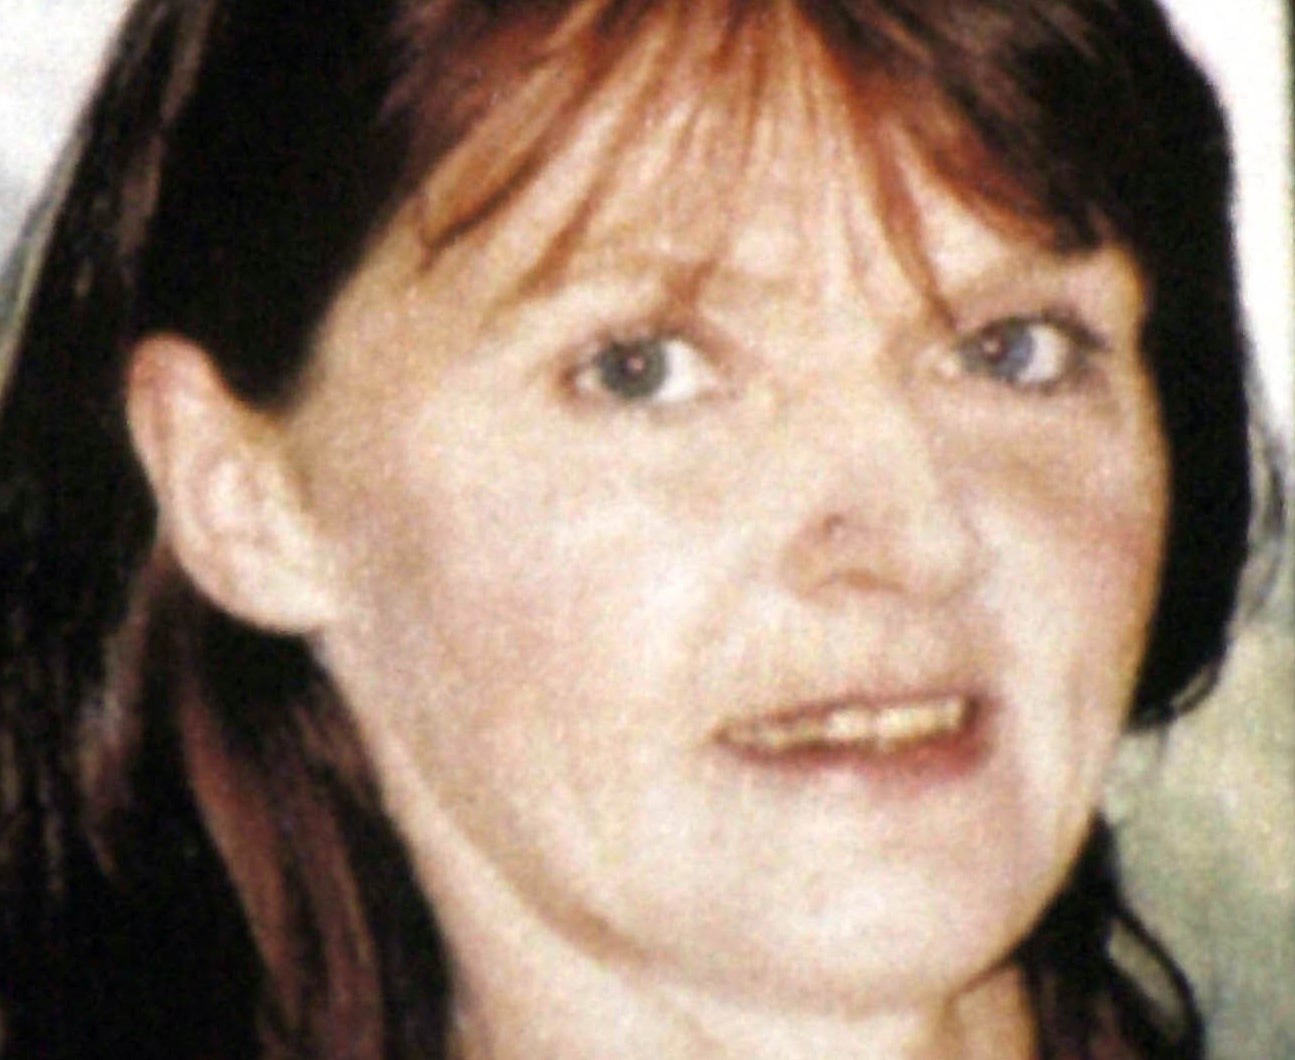 Louise Tiffany disappeared after leaving her home in Edinburgh in 2002